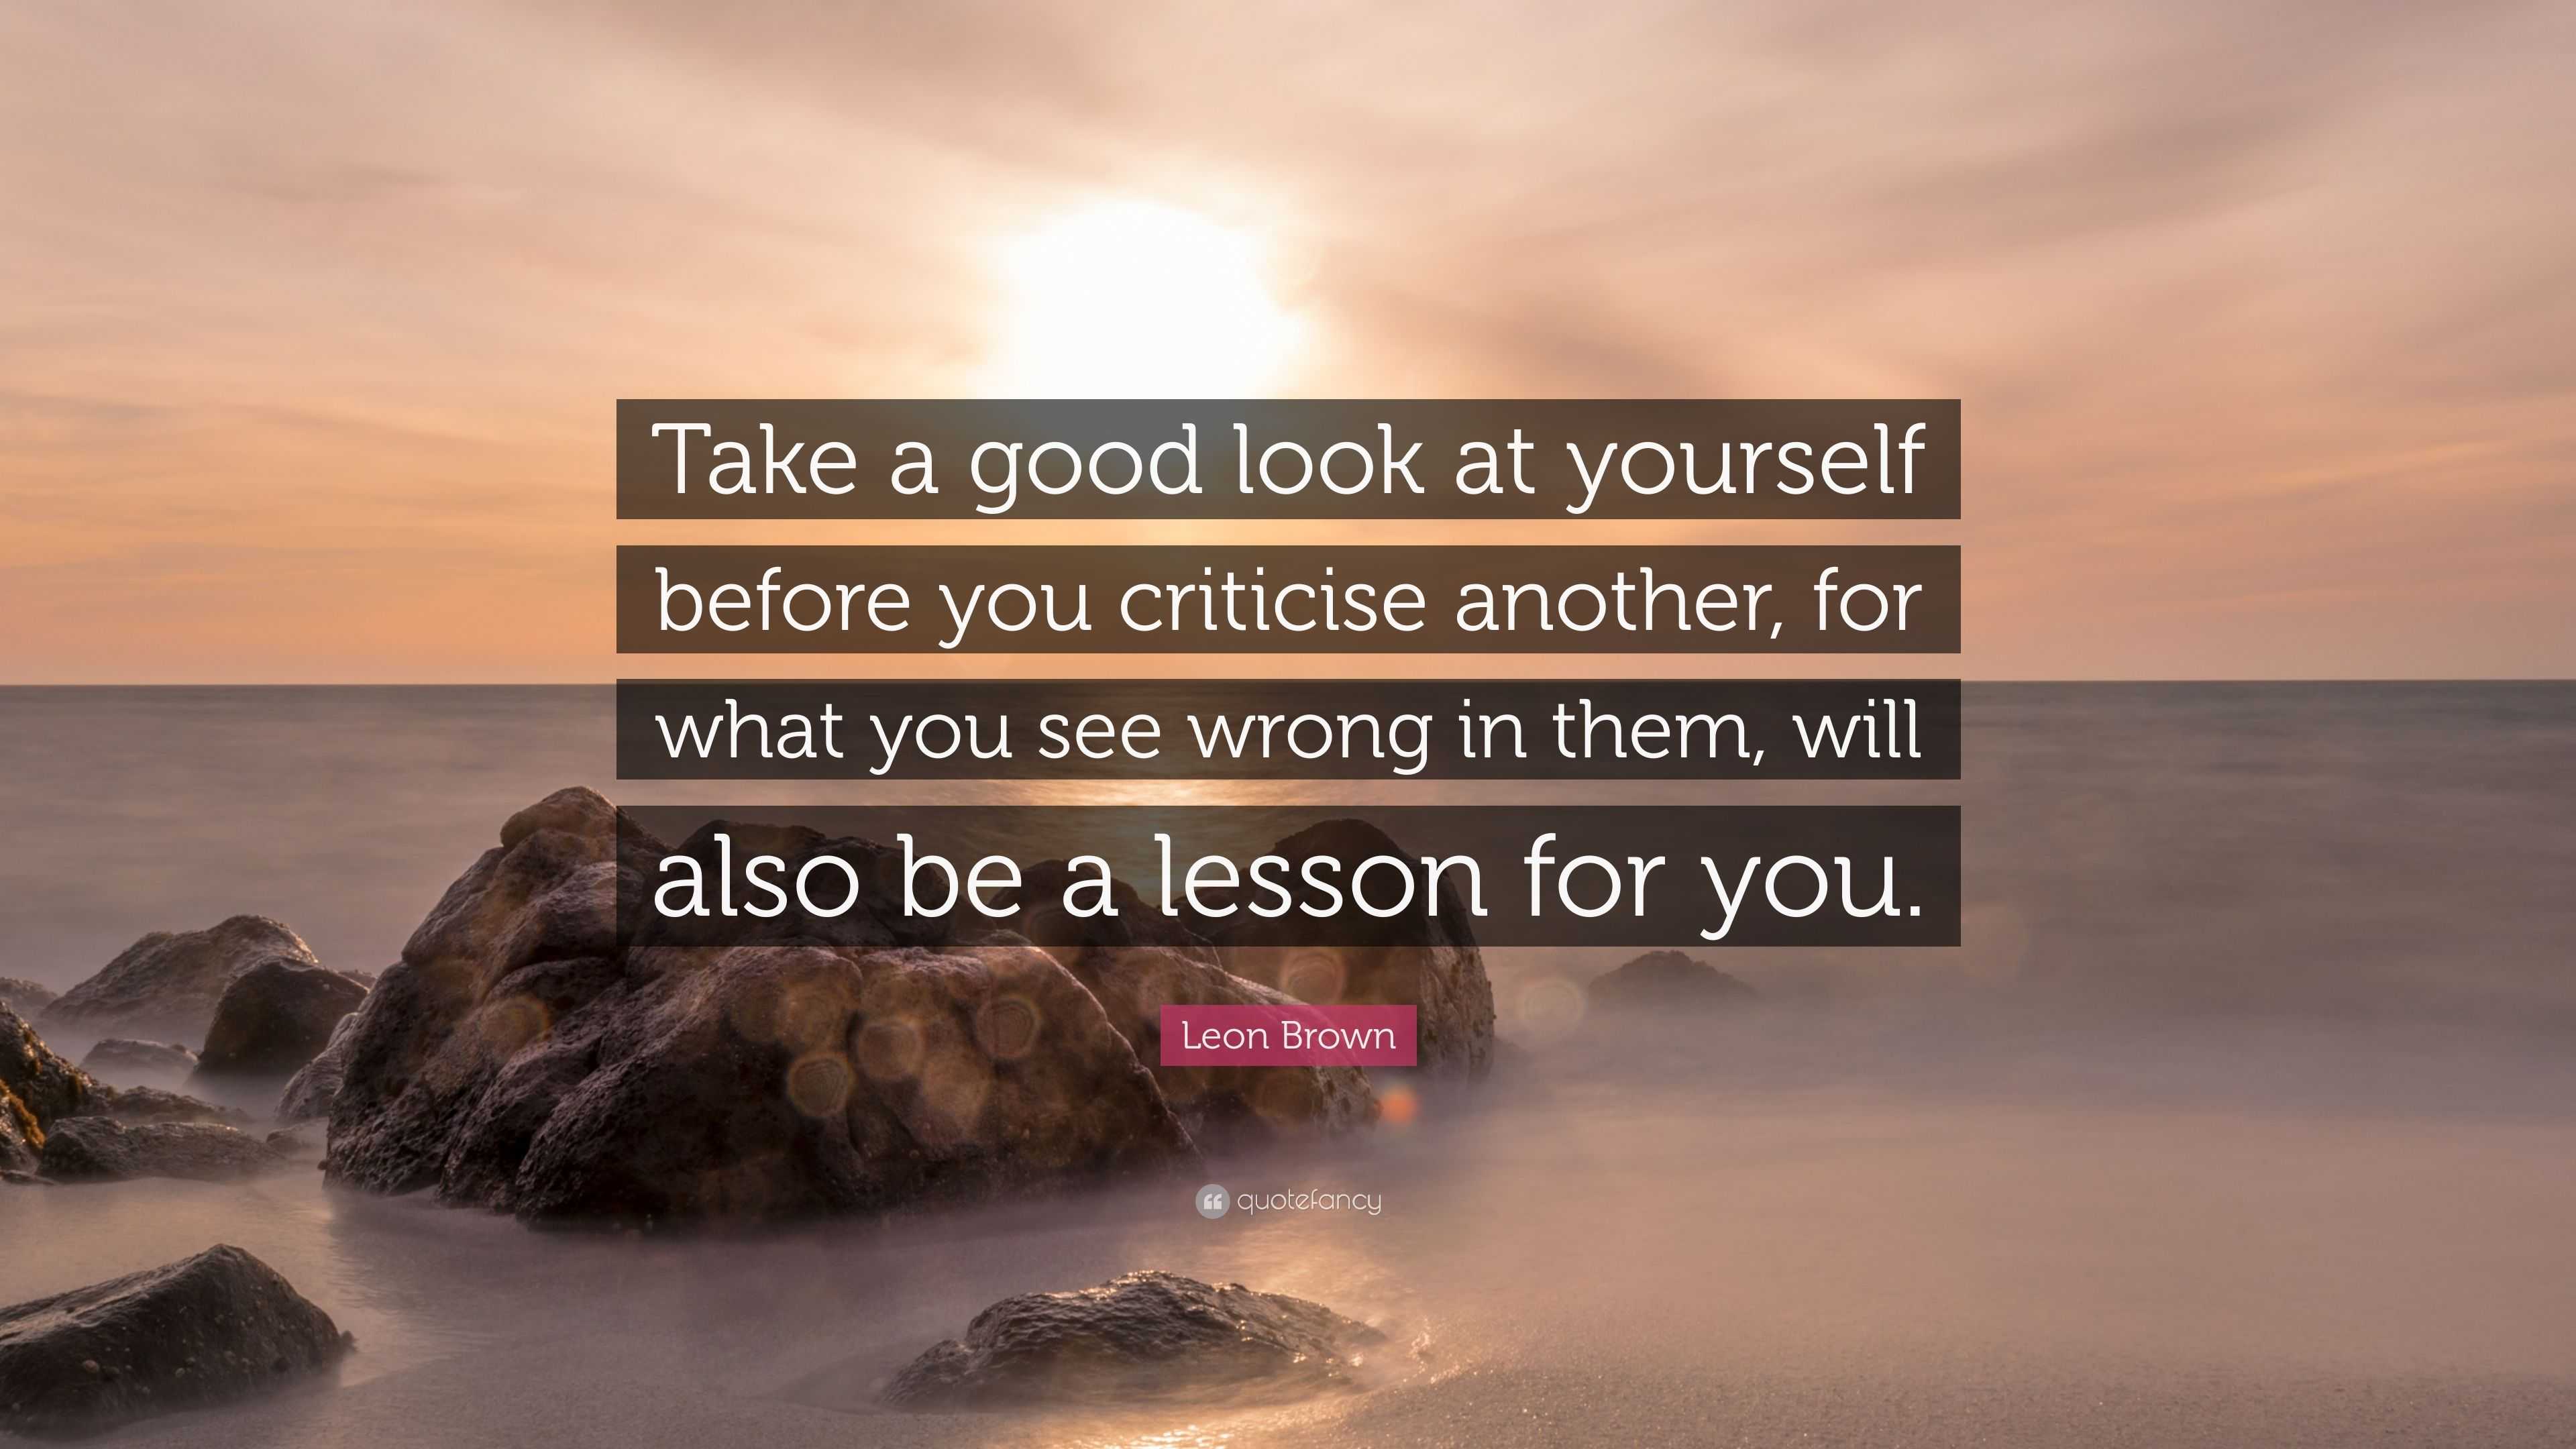 Take a good look at yourself before you criticise another, for what you see  wrong in them, will also be a lesson for you.